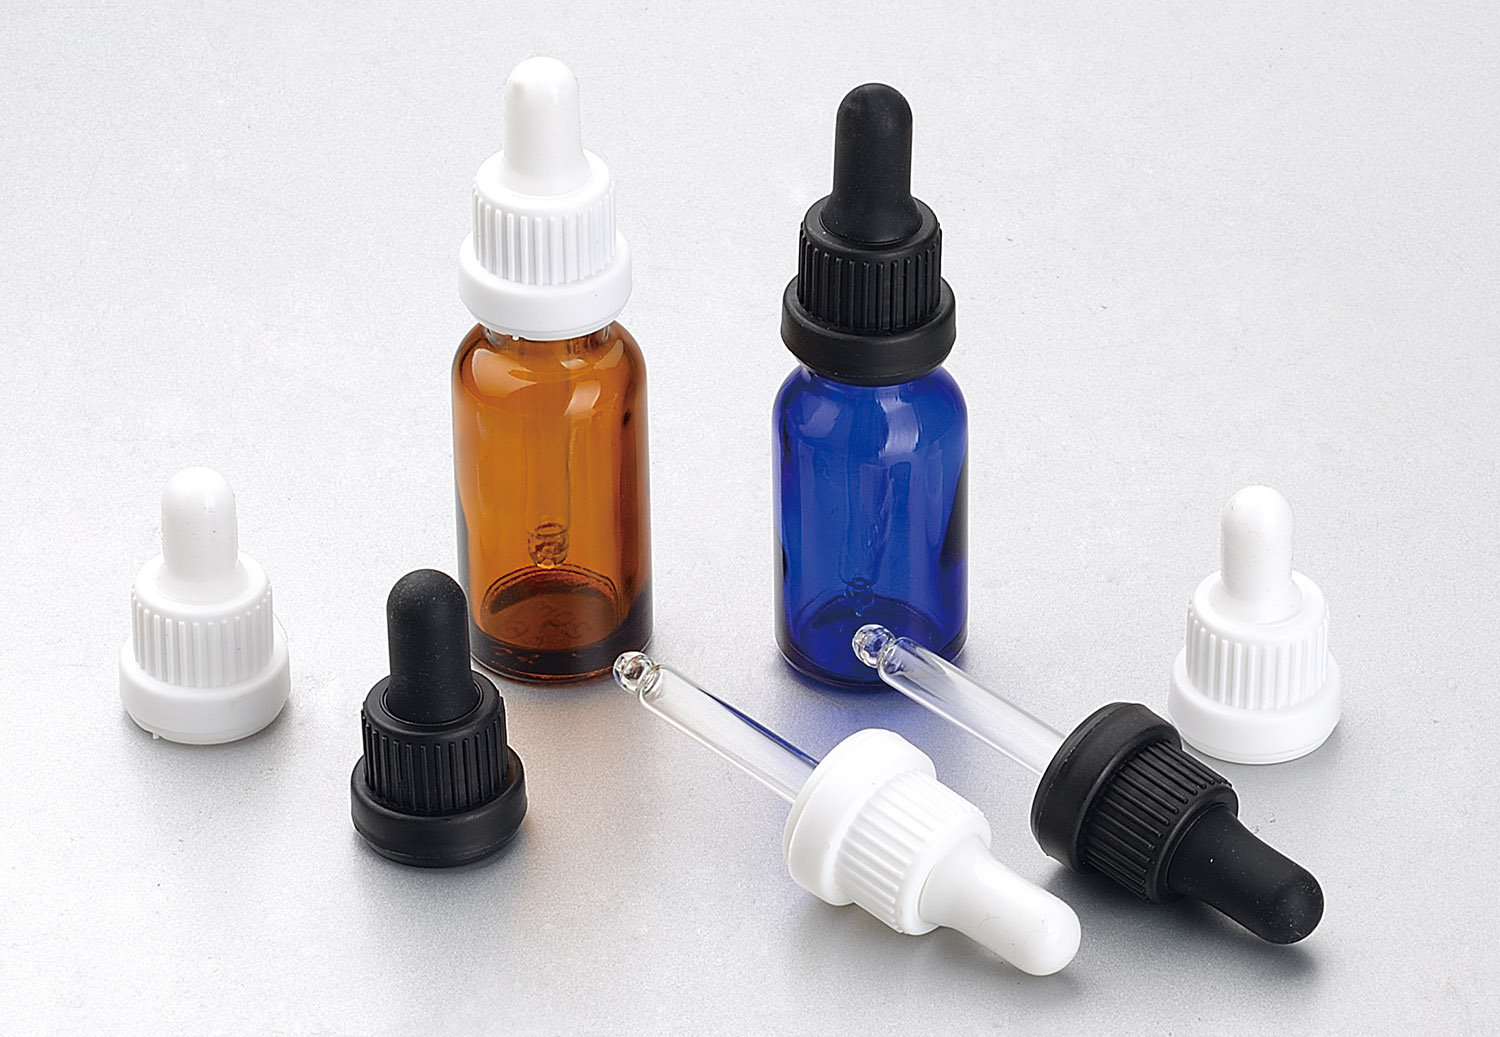  5ml 10ml 20ml 30ml 50ml 100ml glass bottle essential oil bottles with child resistant cap dropper pipette for essential oil